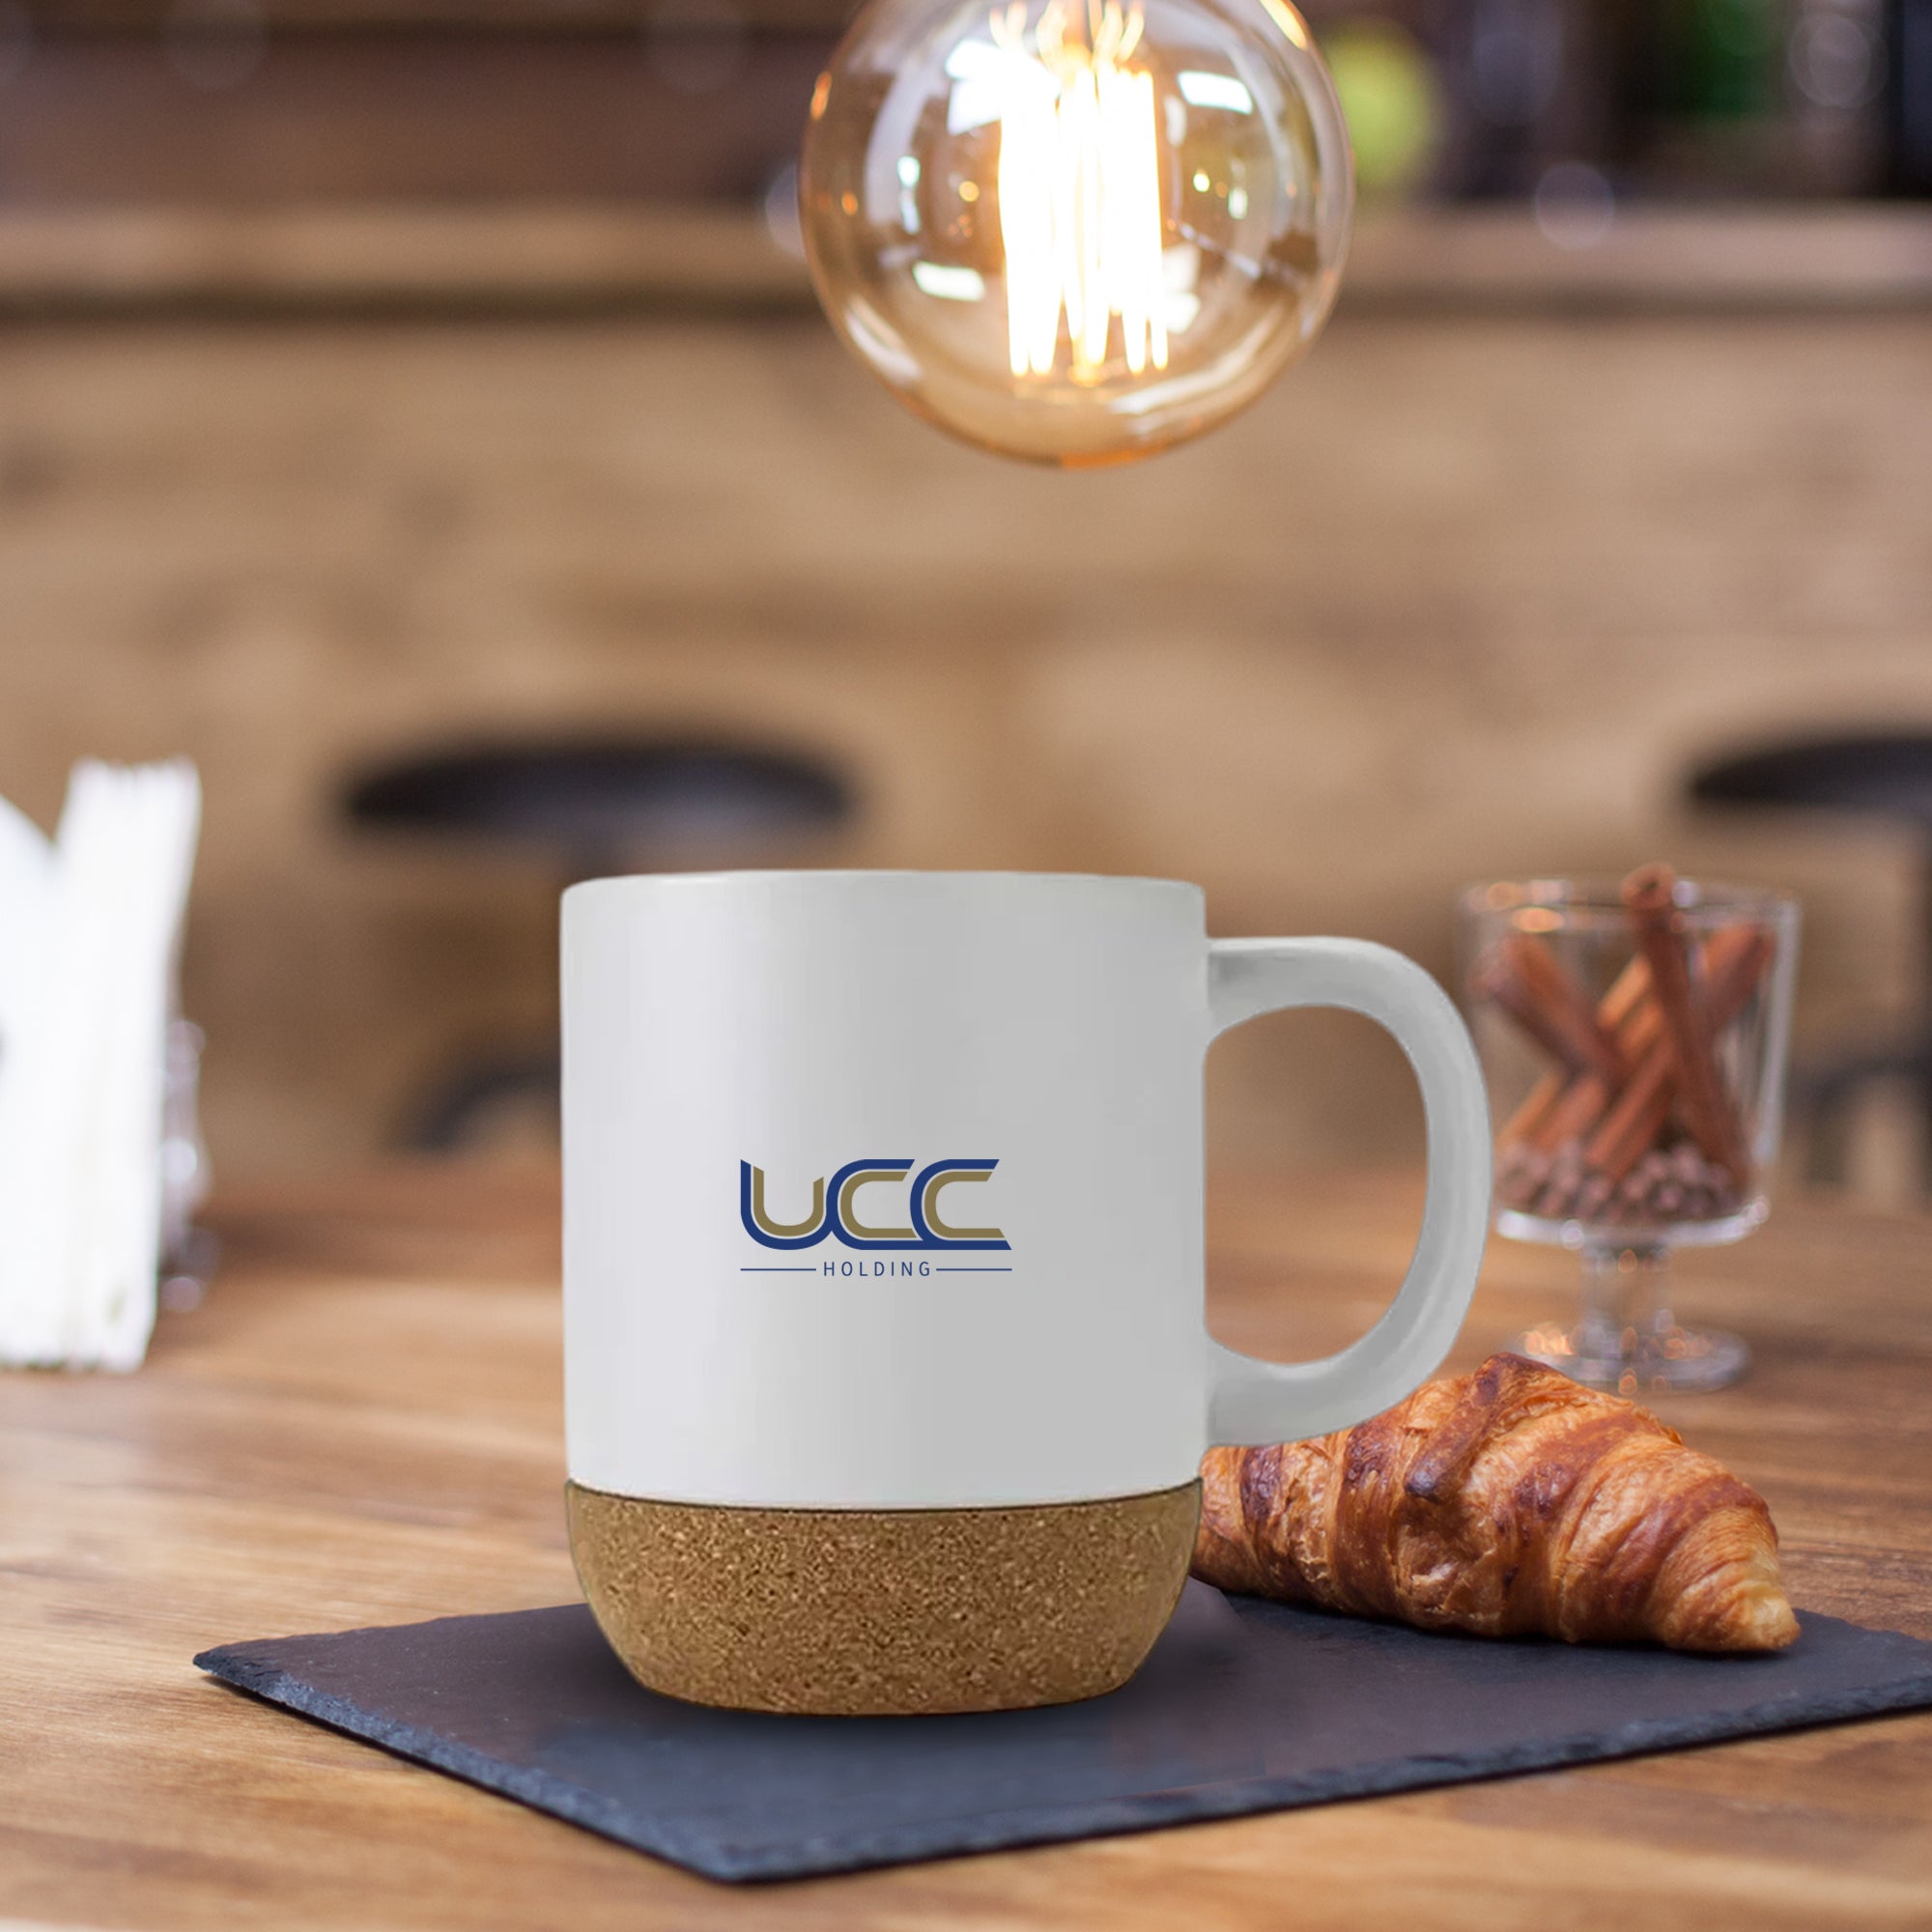 Mugs with Lid and Cork Base